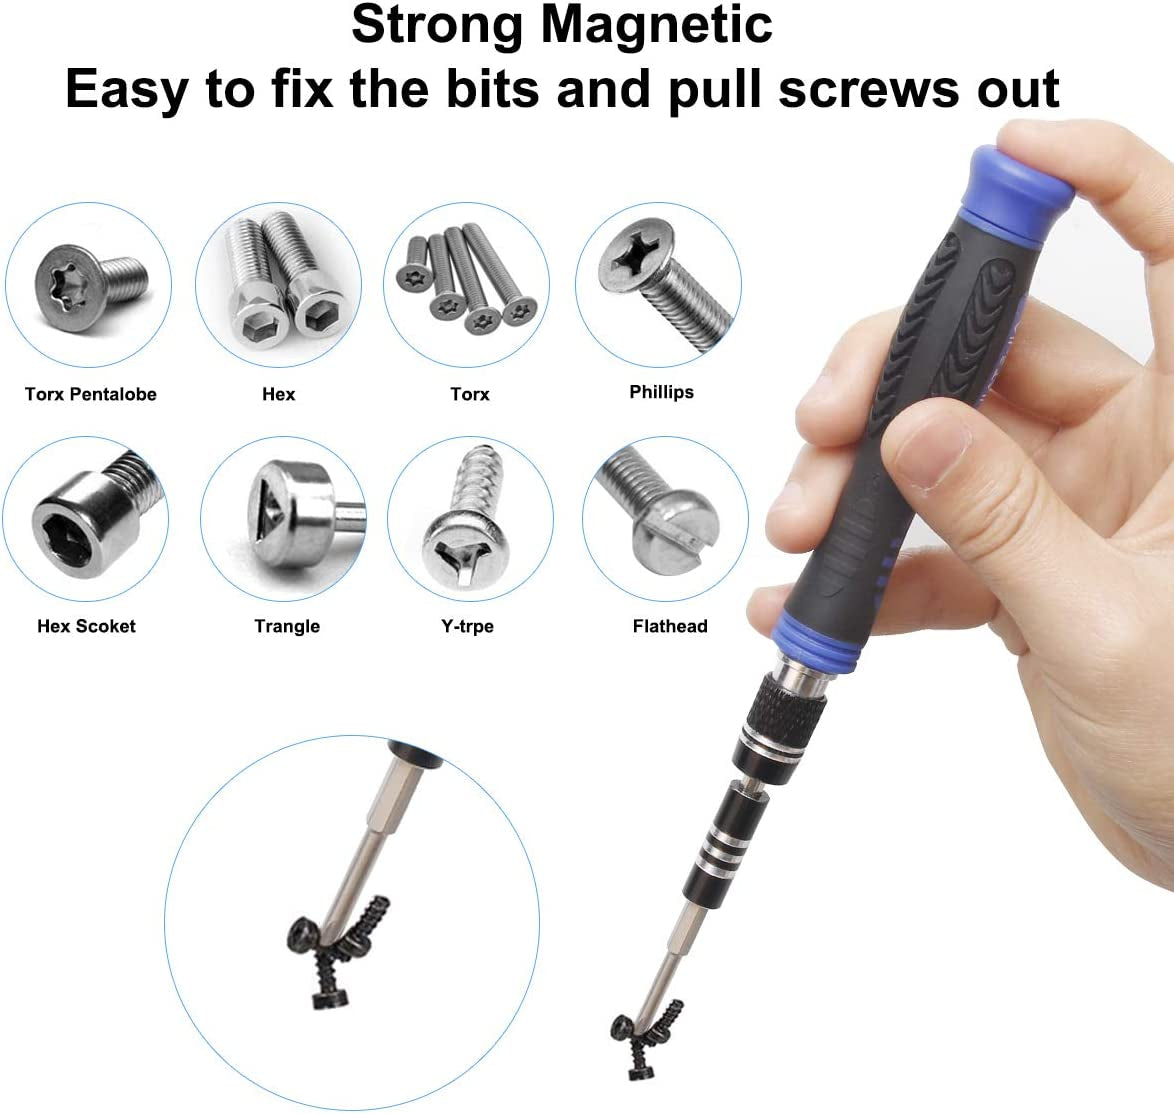 36 in 1 Magnetic Precision Screwdriver Set,  Multi-Functional Electronics Precision Telephone Repair Tool Kit with Magnetic Case for Iphone, PC, Watch, Etc.